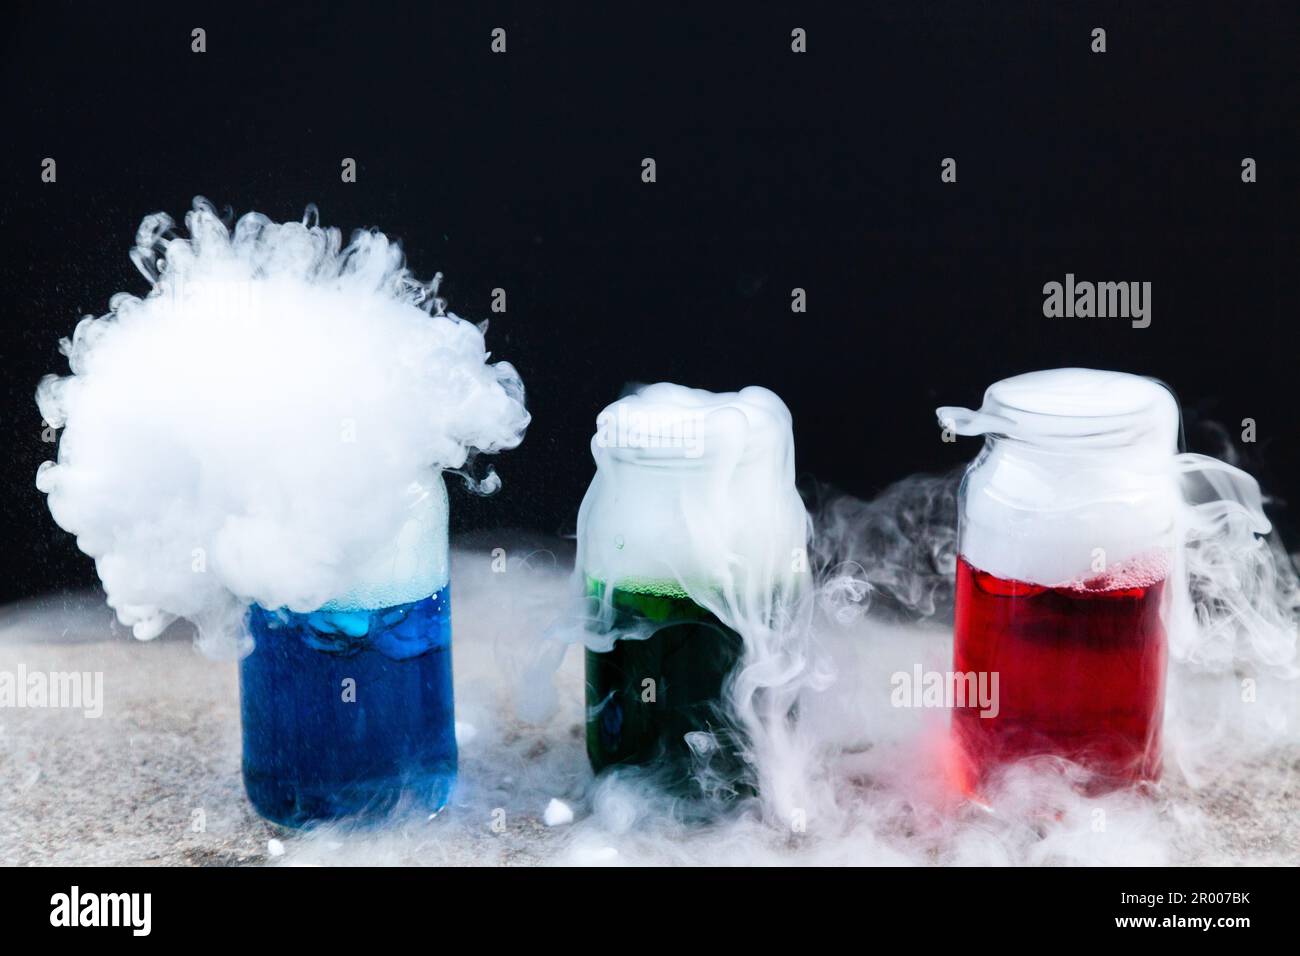 Fun science experiment with dry ice and coloured water and detergent on black backdrop Stock Photo